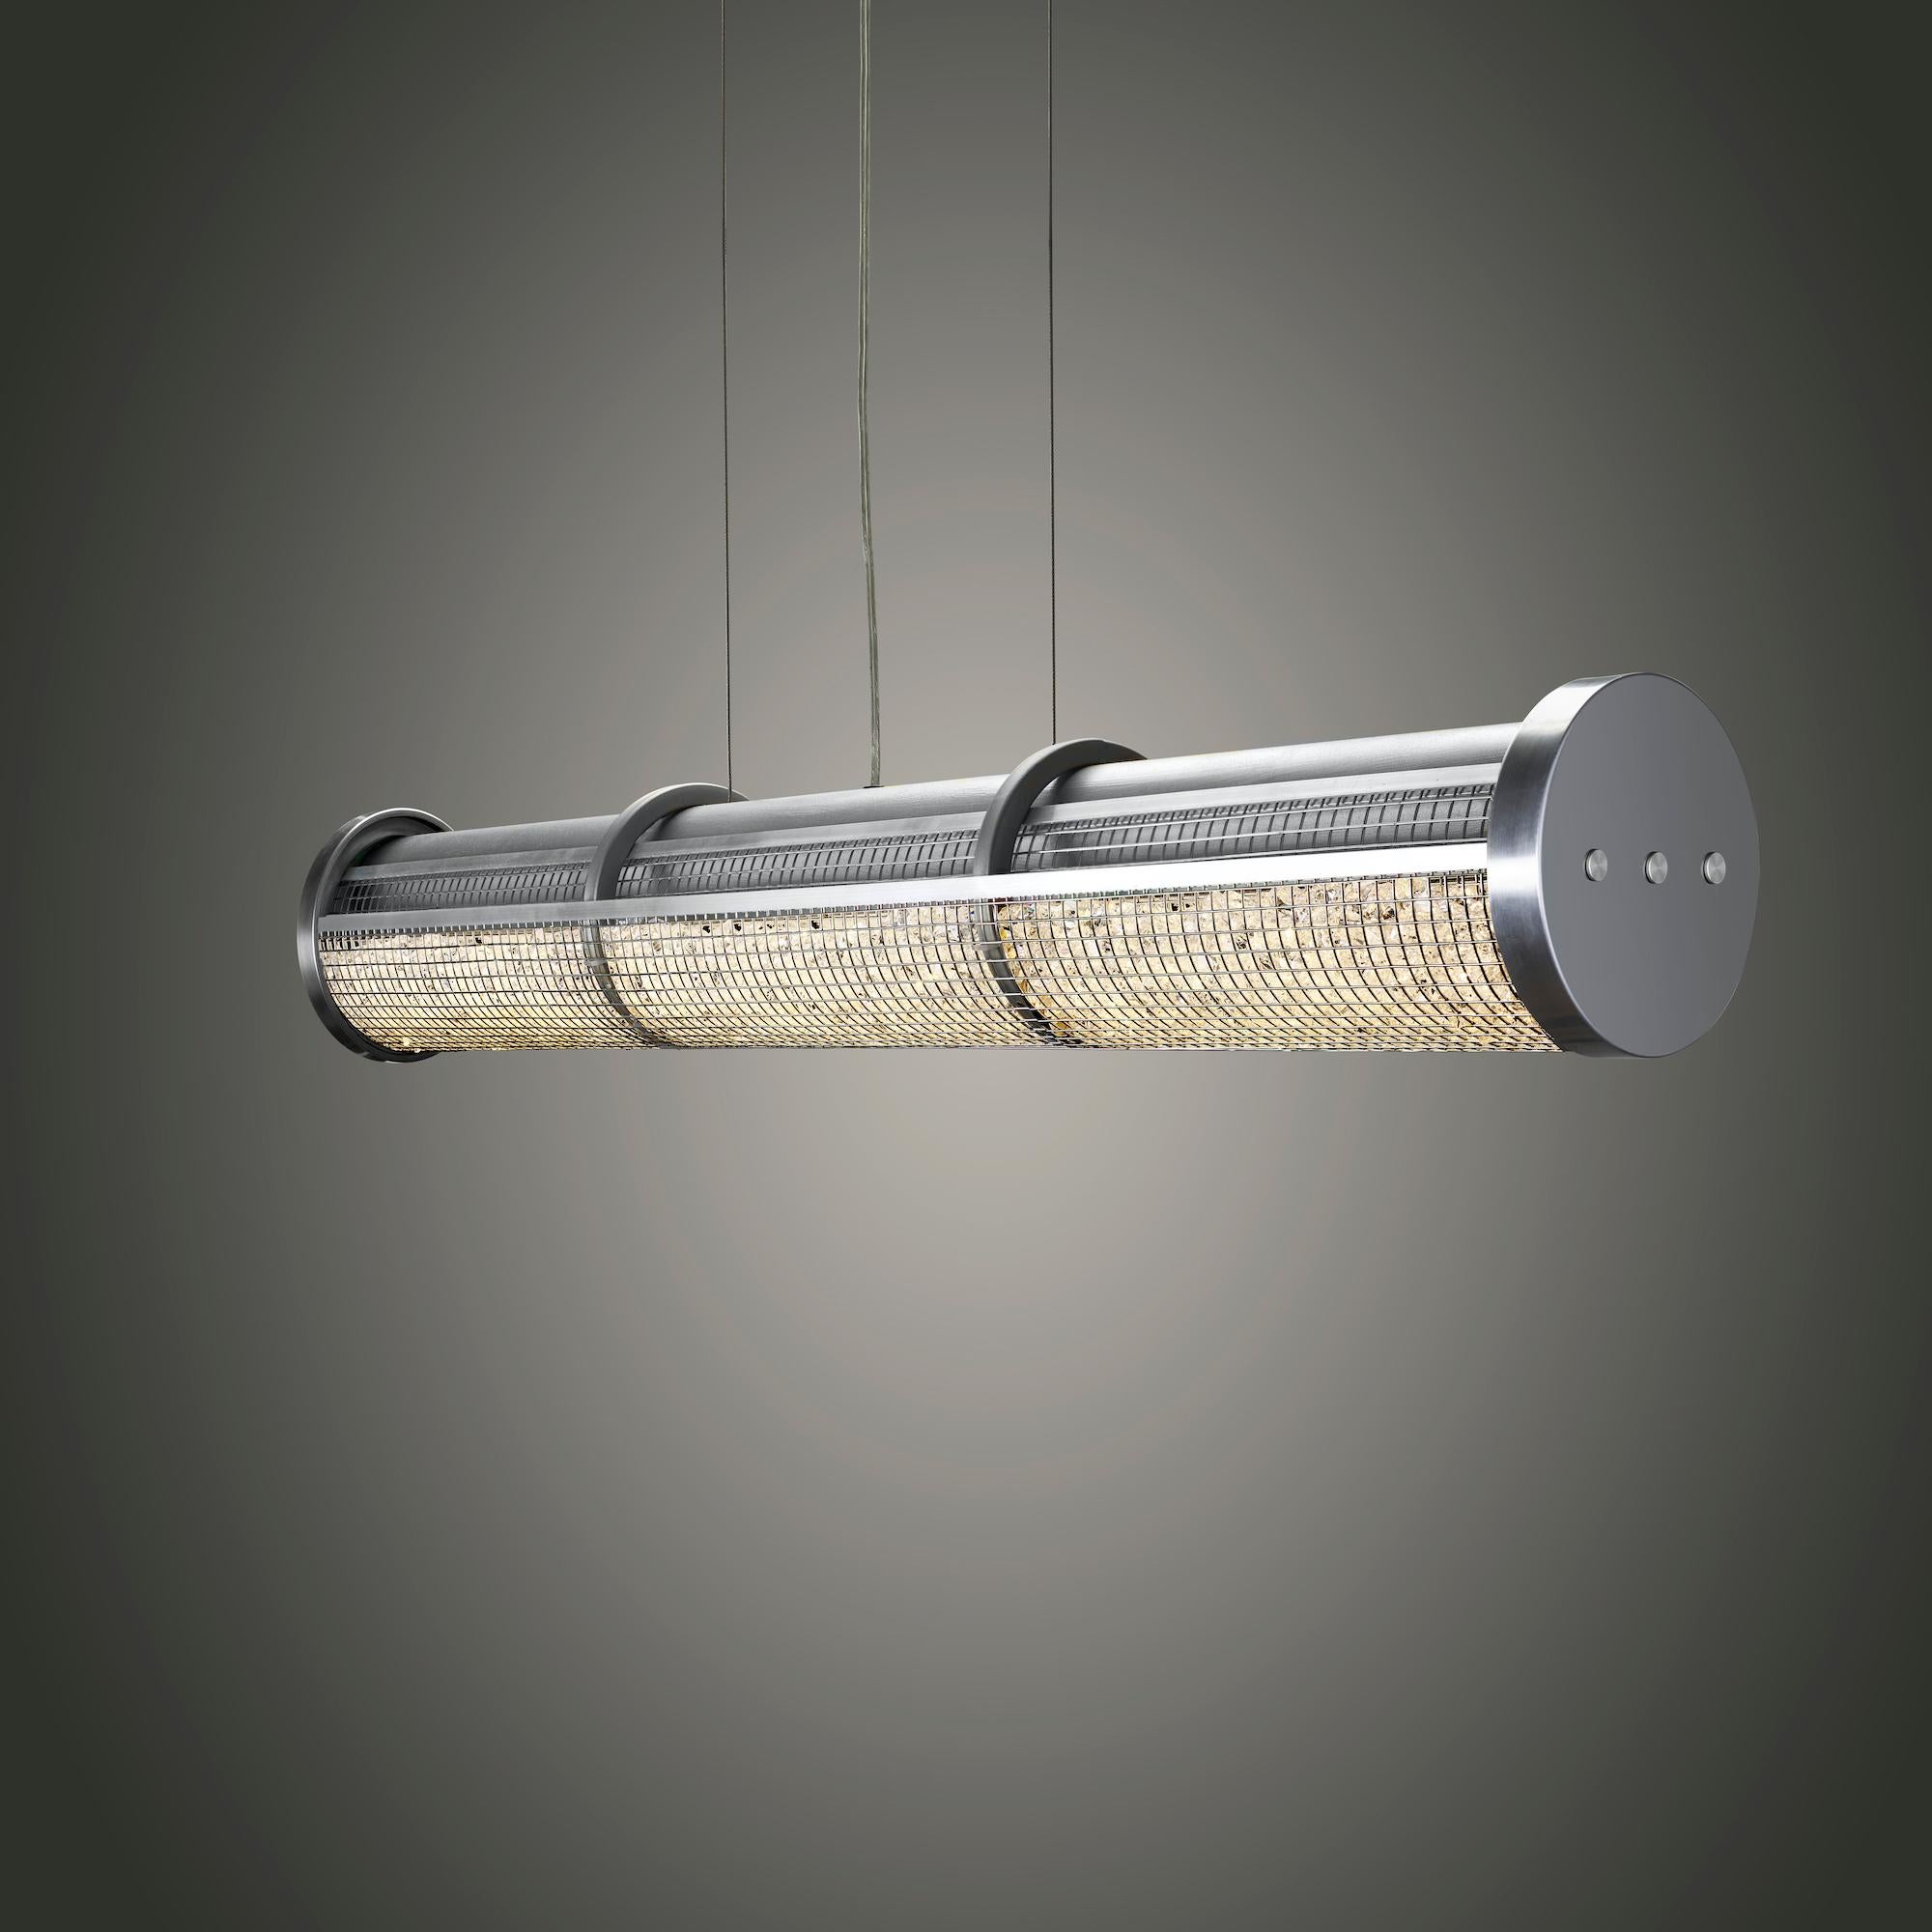 New for 2021, The crystal cage LED linear suspension shines powerful LED luminaries through a stainless steel cage full of chandelier crystal for a sleek linear suspension that shimmers while providing plenty of light.

As the use of LED